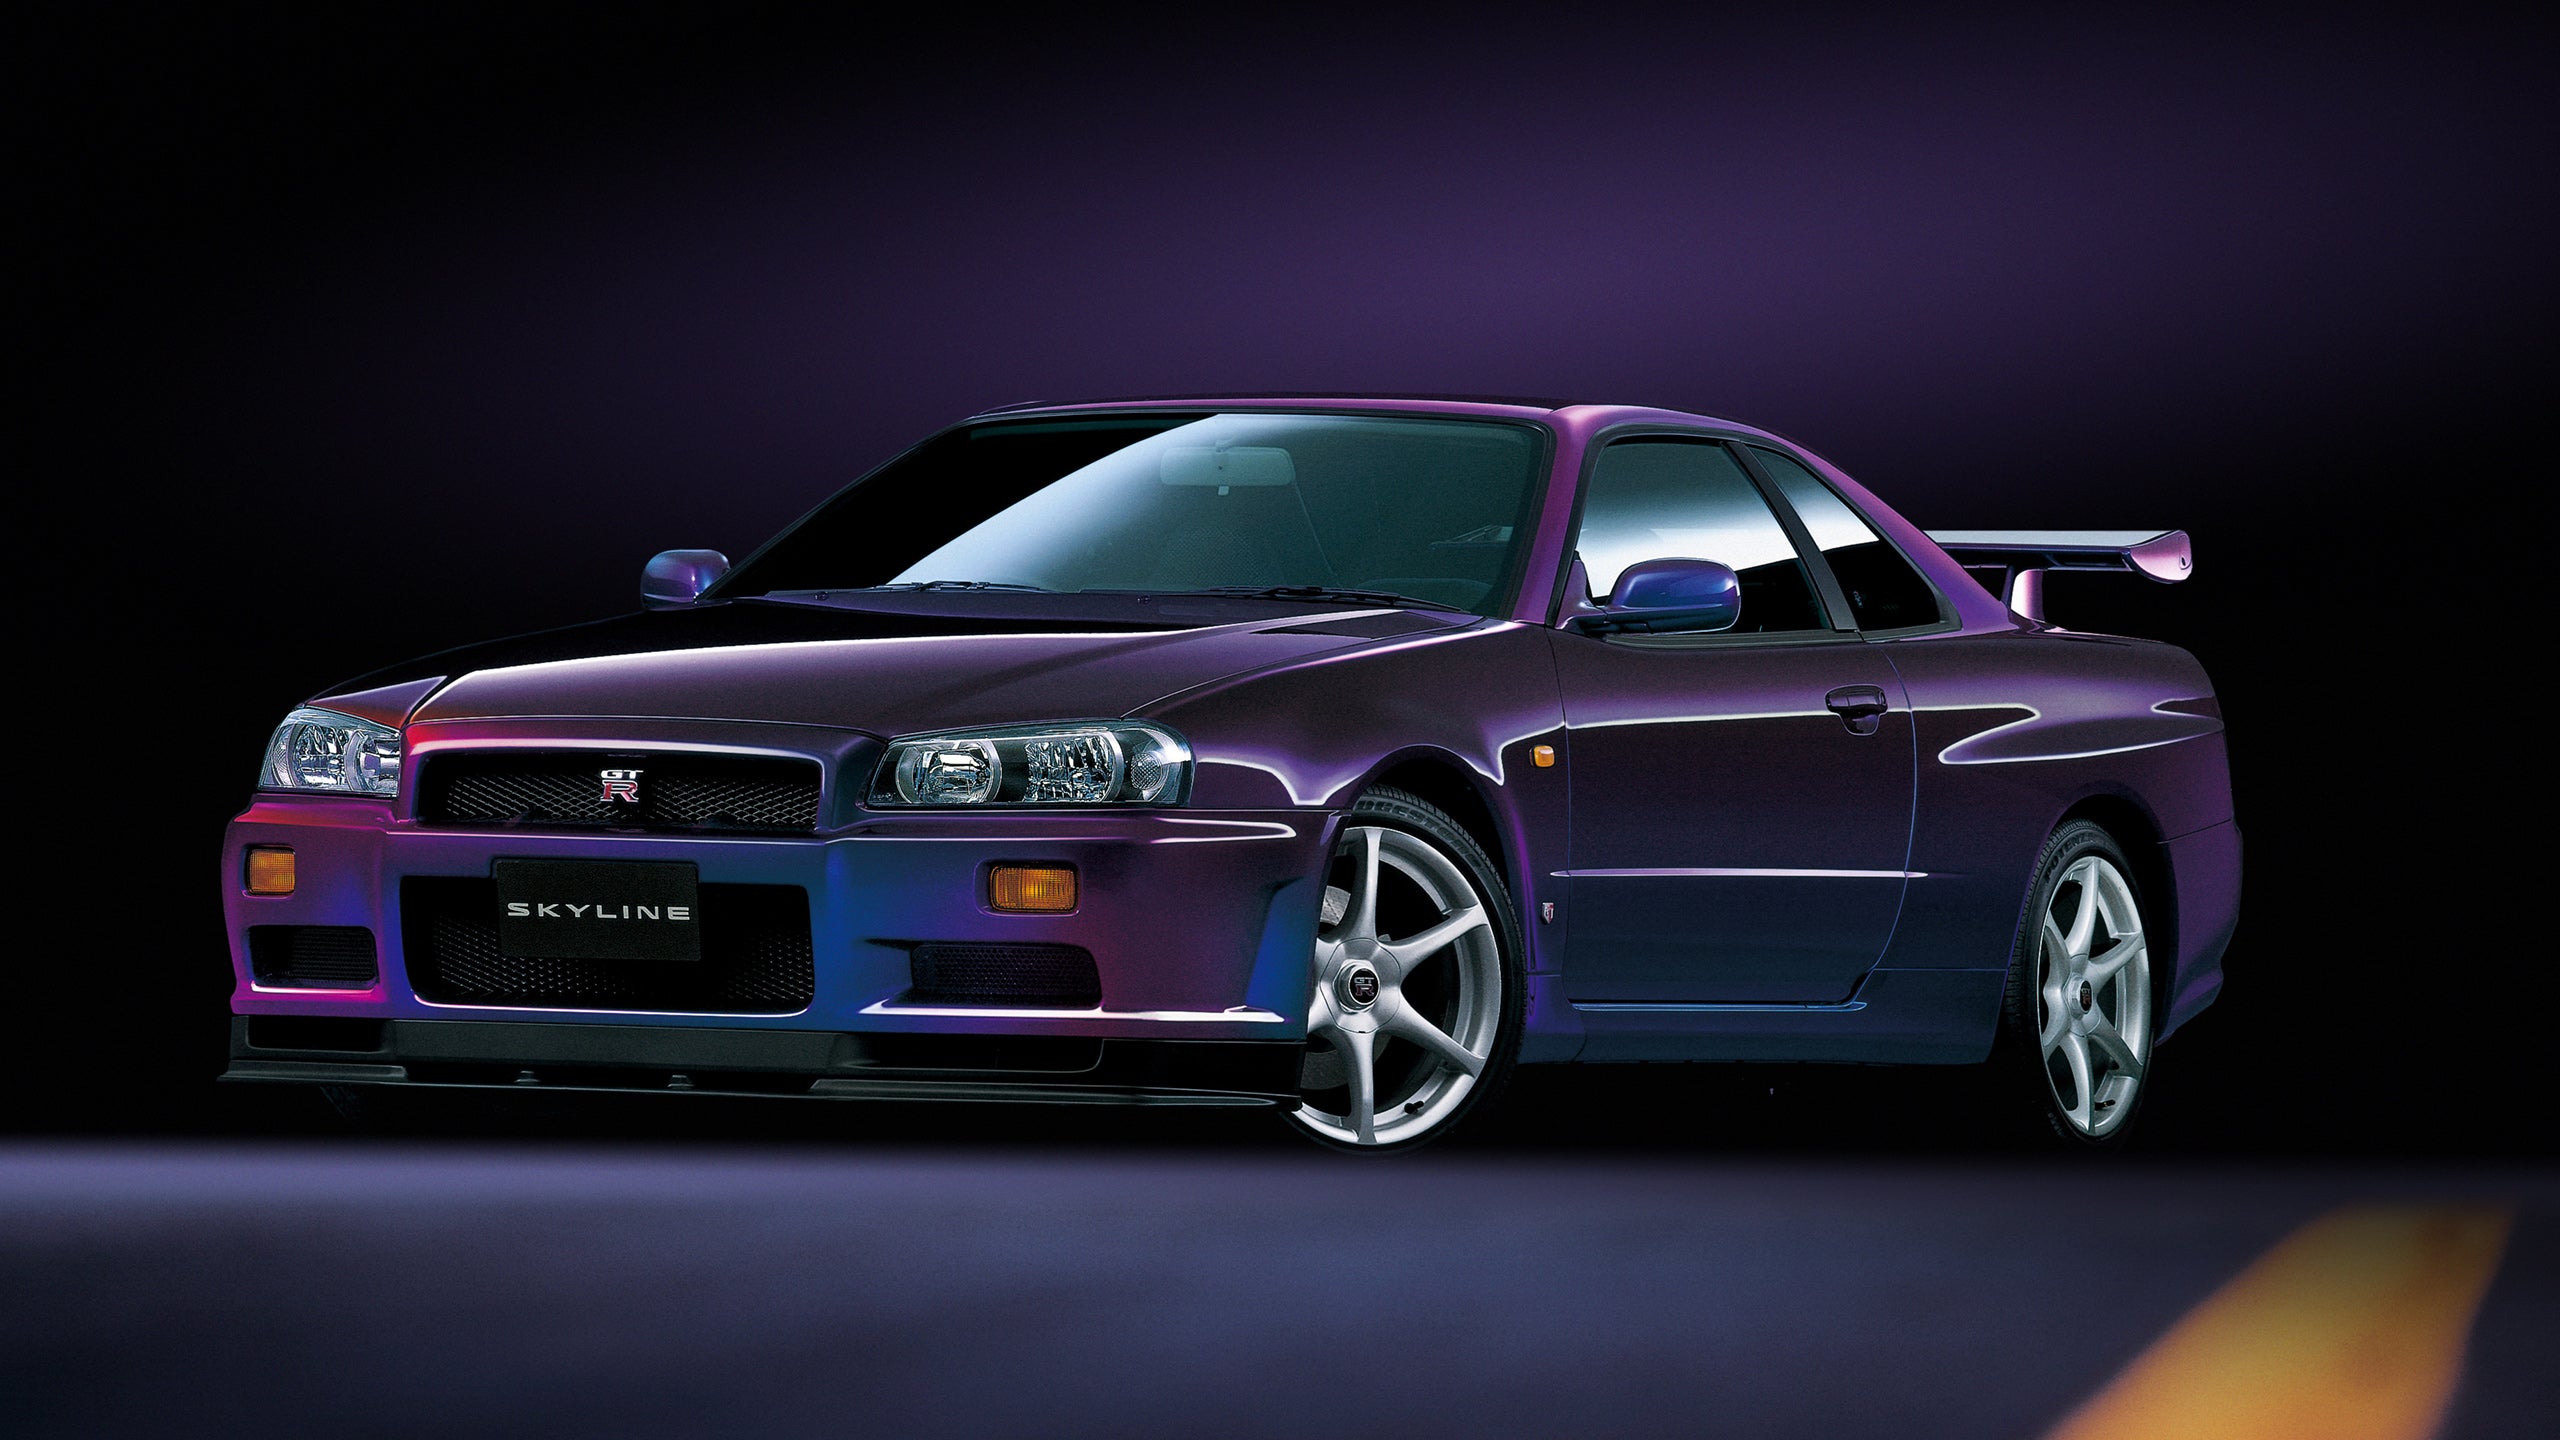 The R34 Nissan Skyline GT-R Is Finally Legal for Import in January